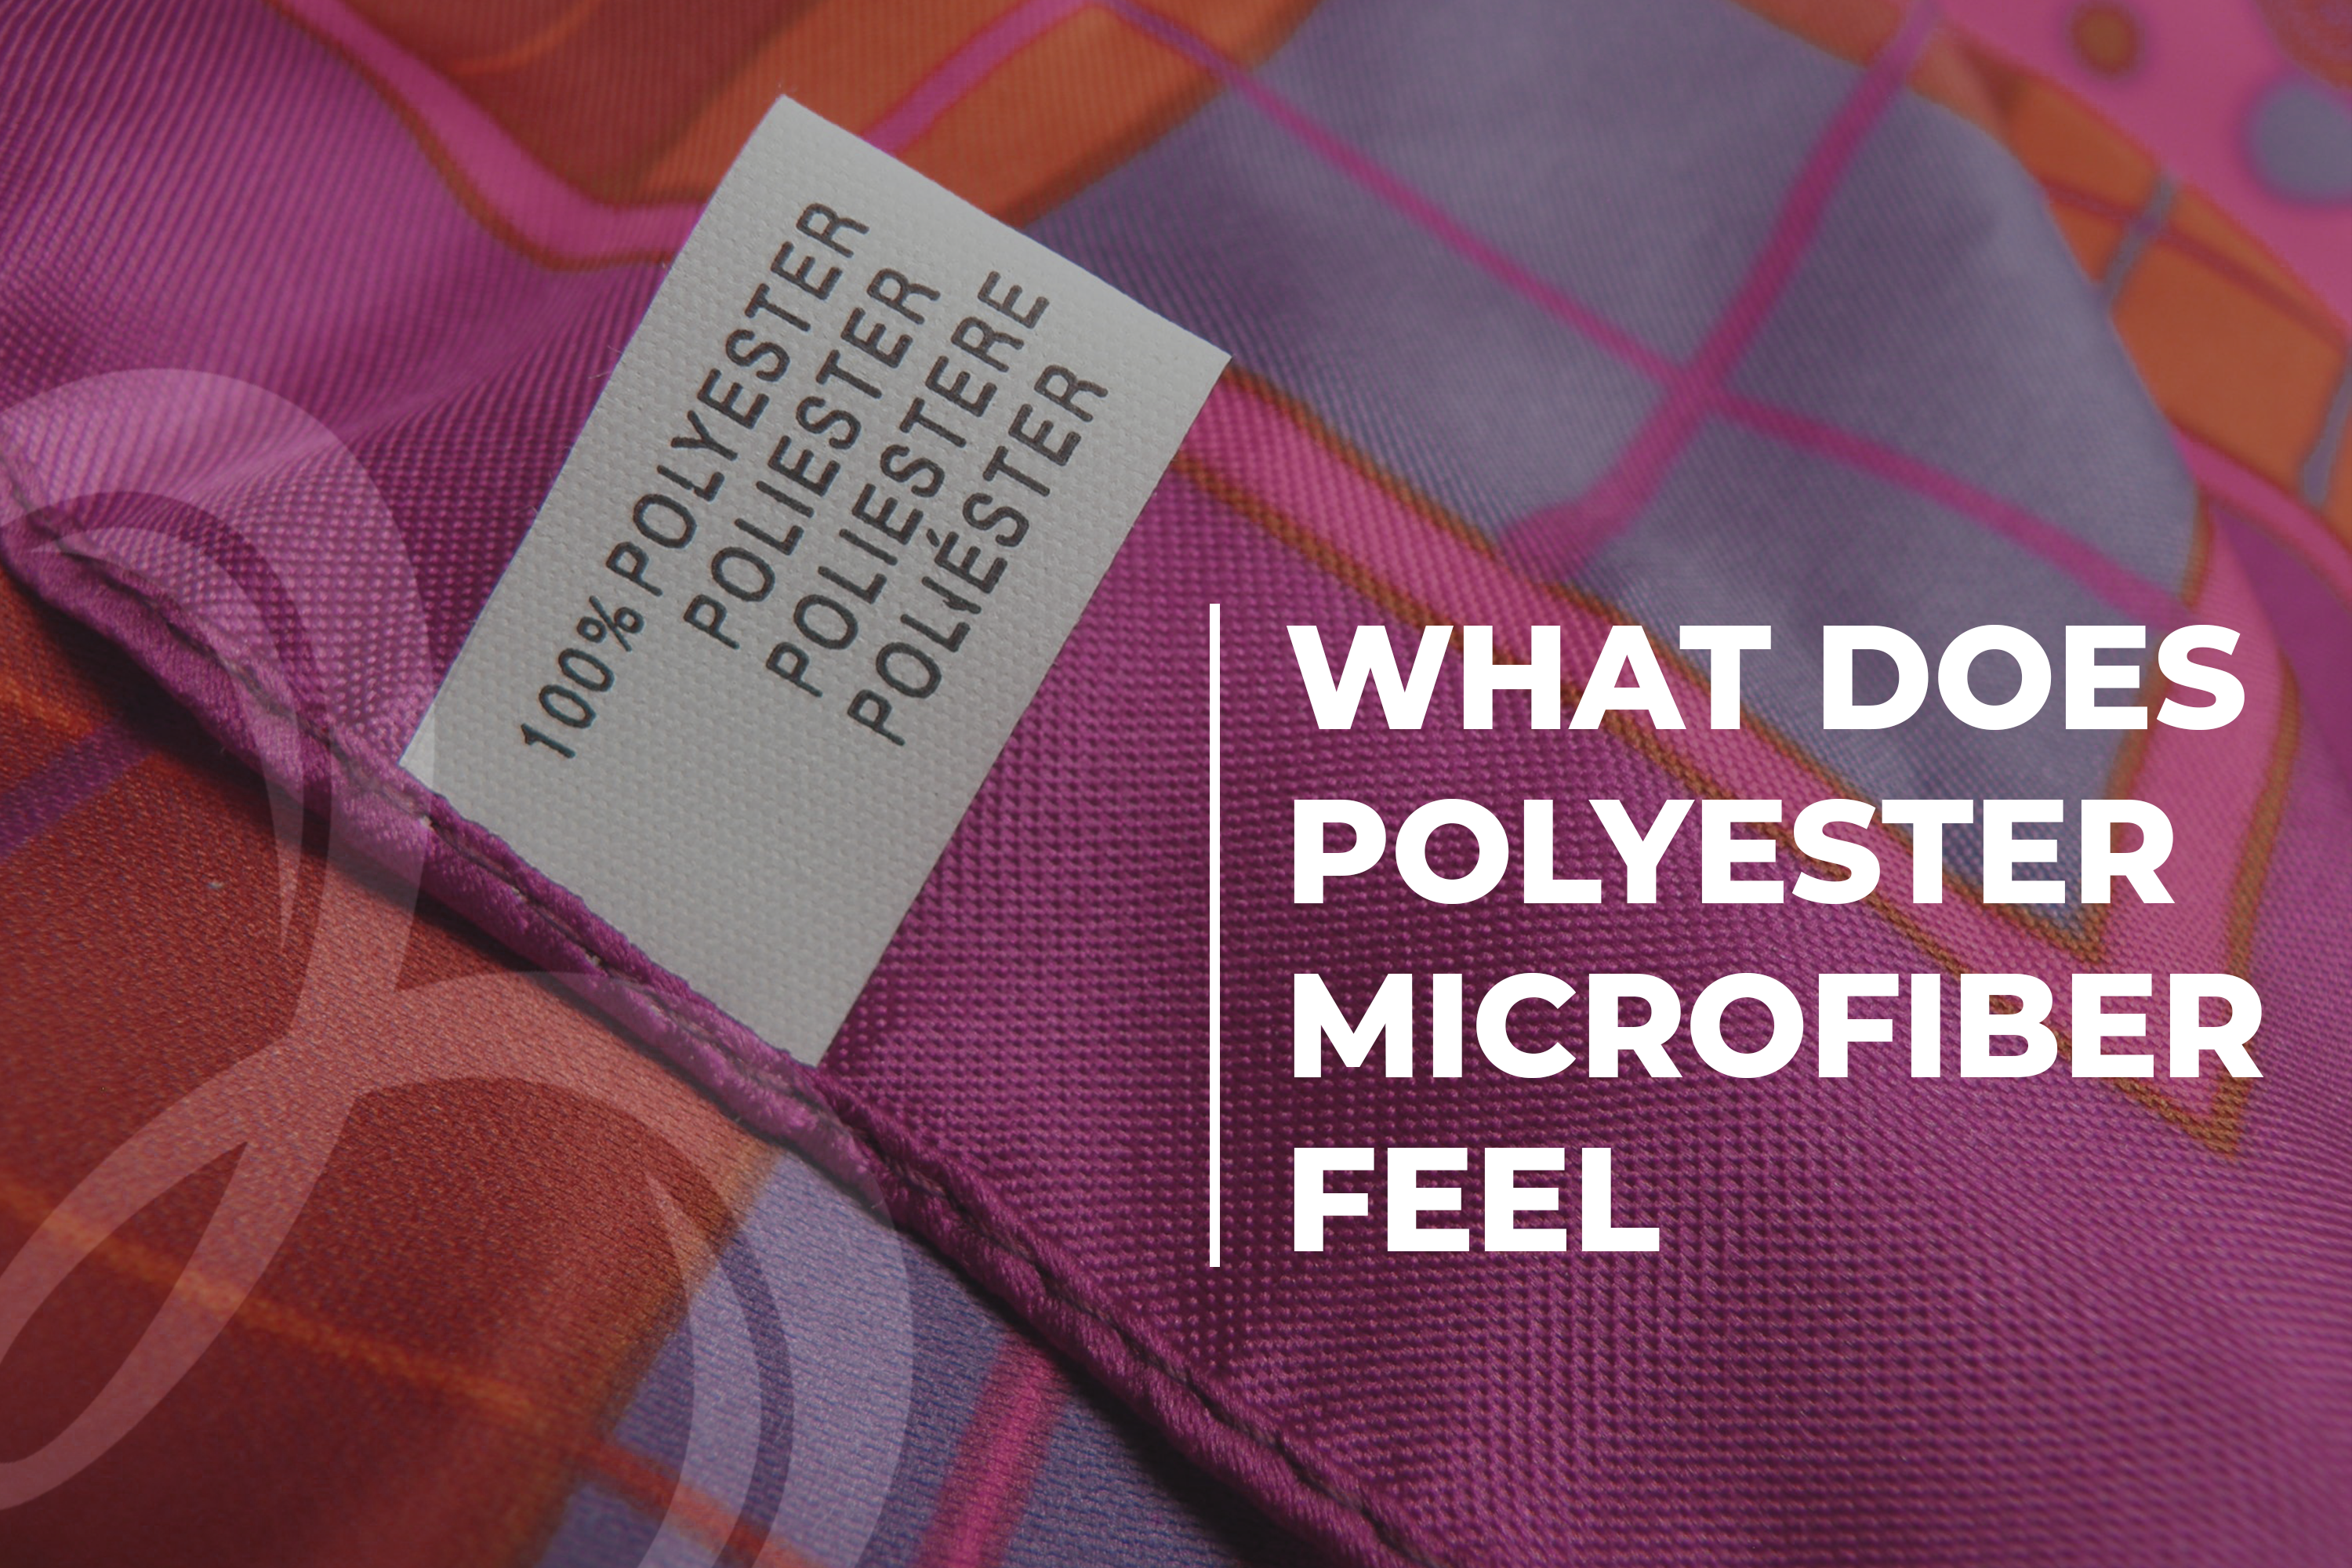 What Does Polyester Microfiber Feel